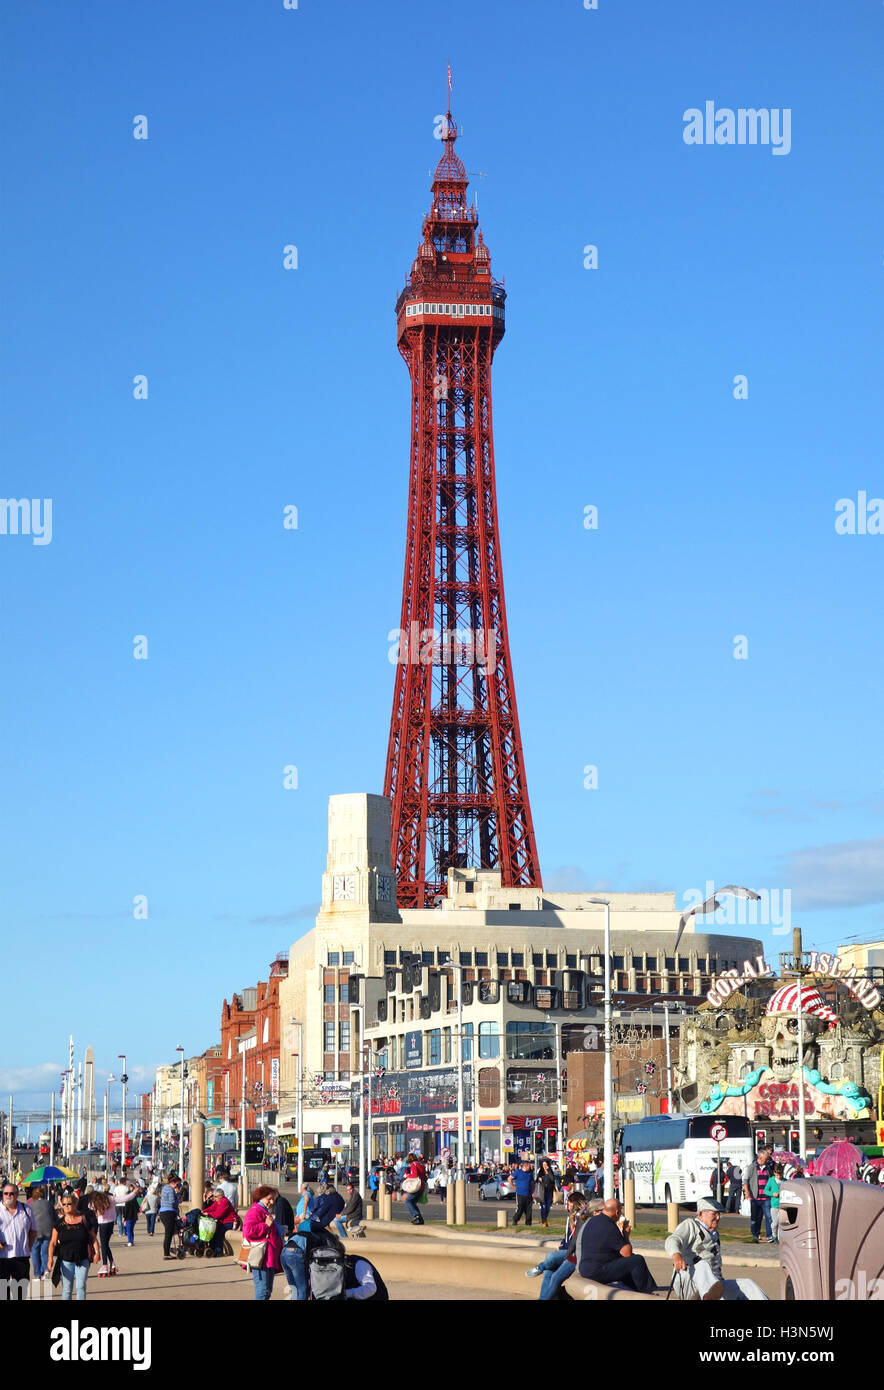 The famous tower at Blackpool in Lancashire, England, UK Stock Photo